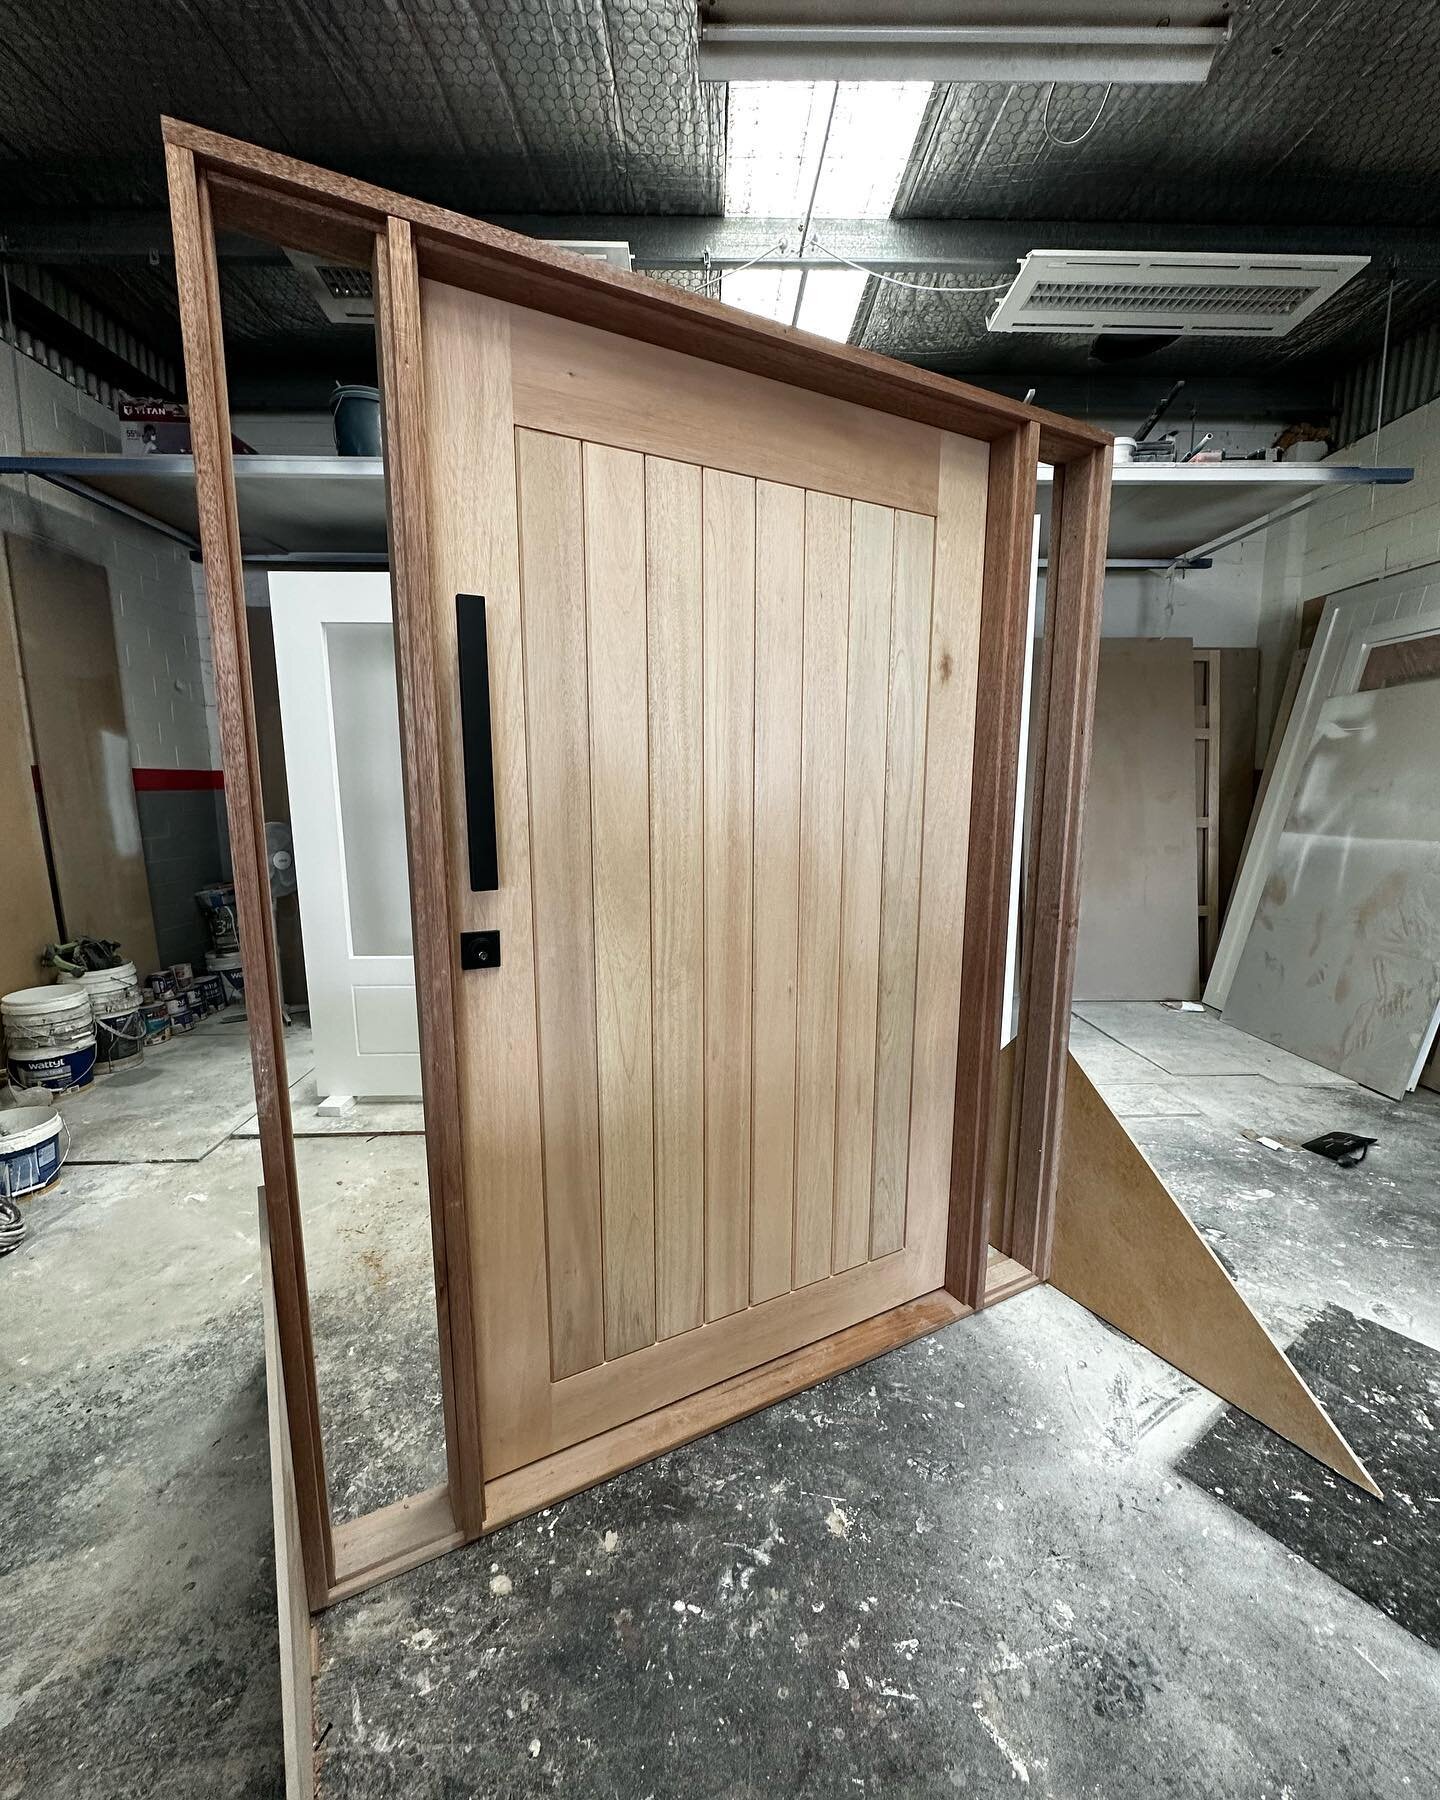 GET IT PREHUNG 🚪

Calling out to all builders, renovators &amp; installers 🔨 

If it&rsquo;s an entrance door install that you are looking to take on, why not consider a pre-hung unit?

Our entrance door &amp; frame units are designed to specificat